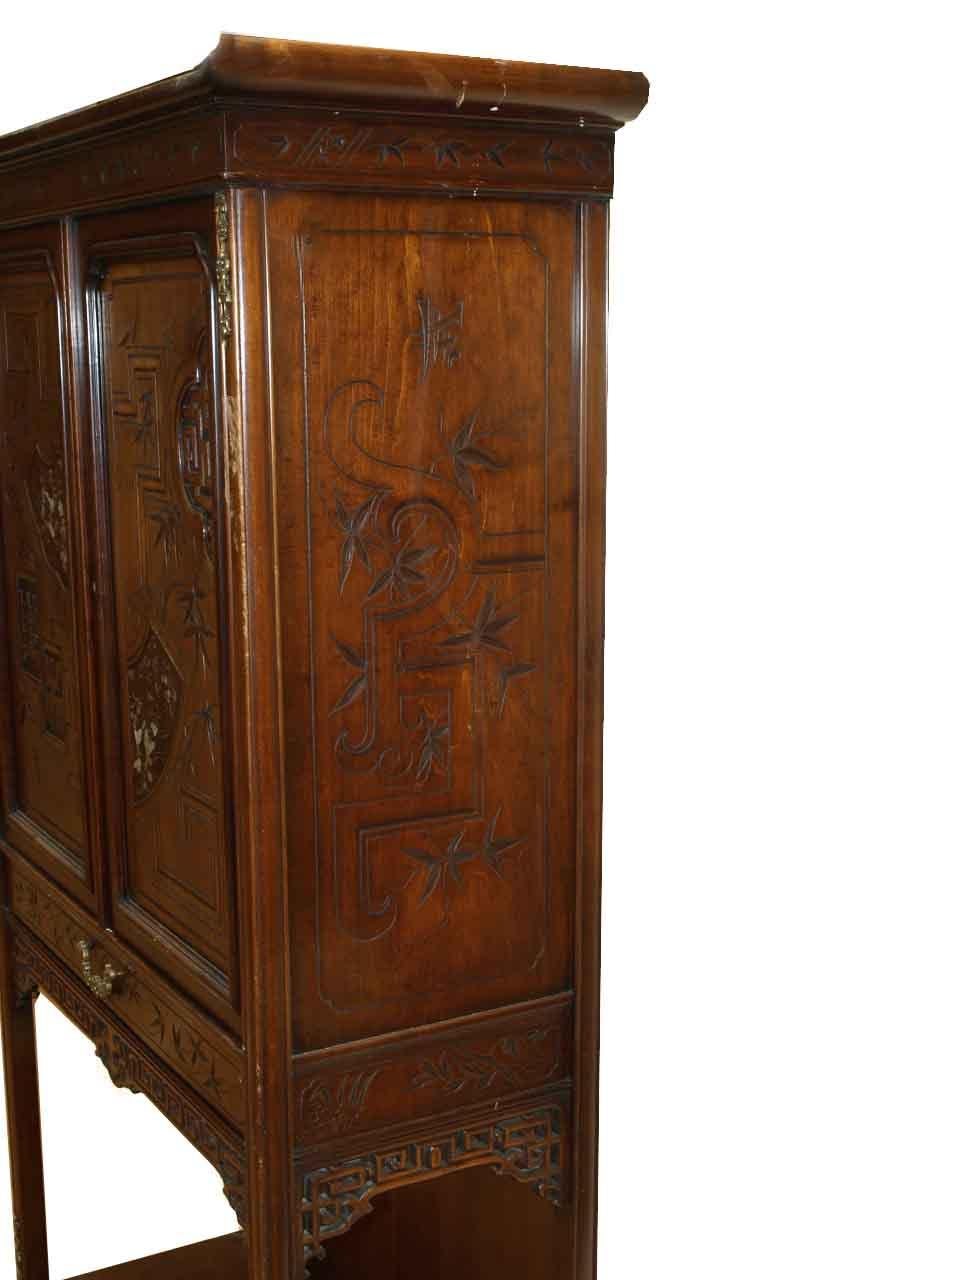 Carved Japanese Inlaid Cabinet In Good Condition For Sale In Wilson, NC